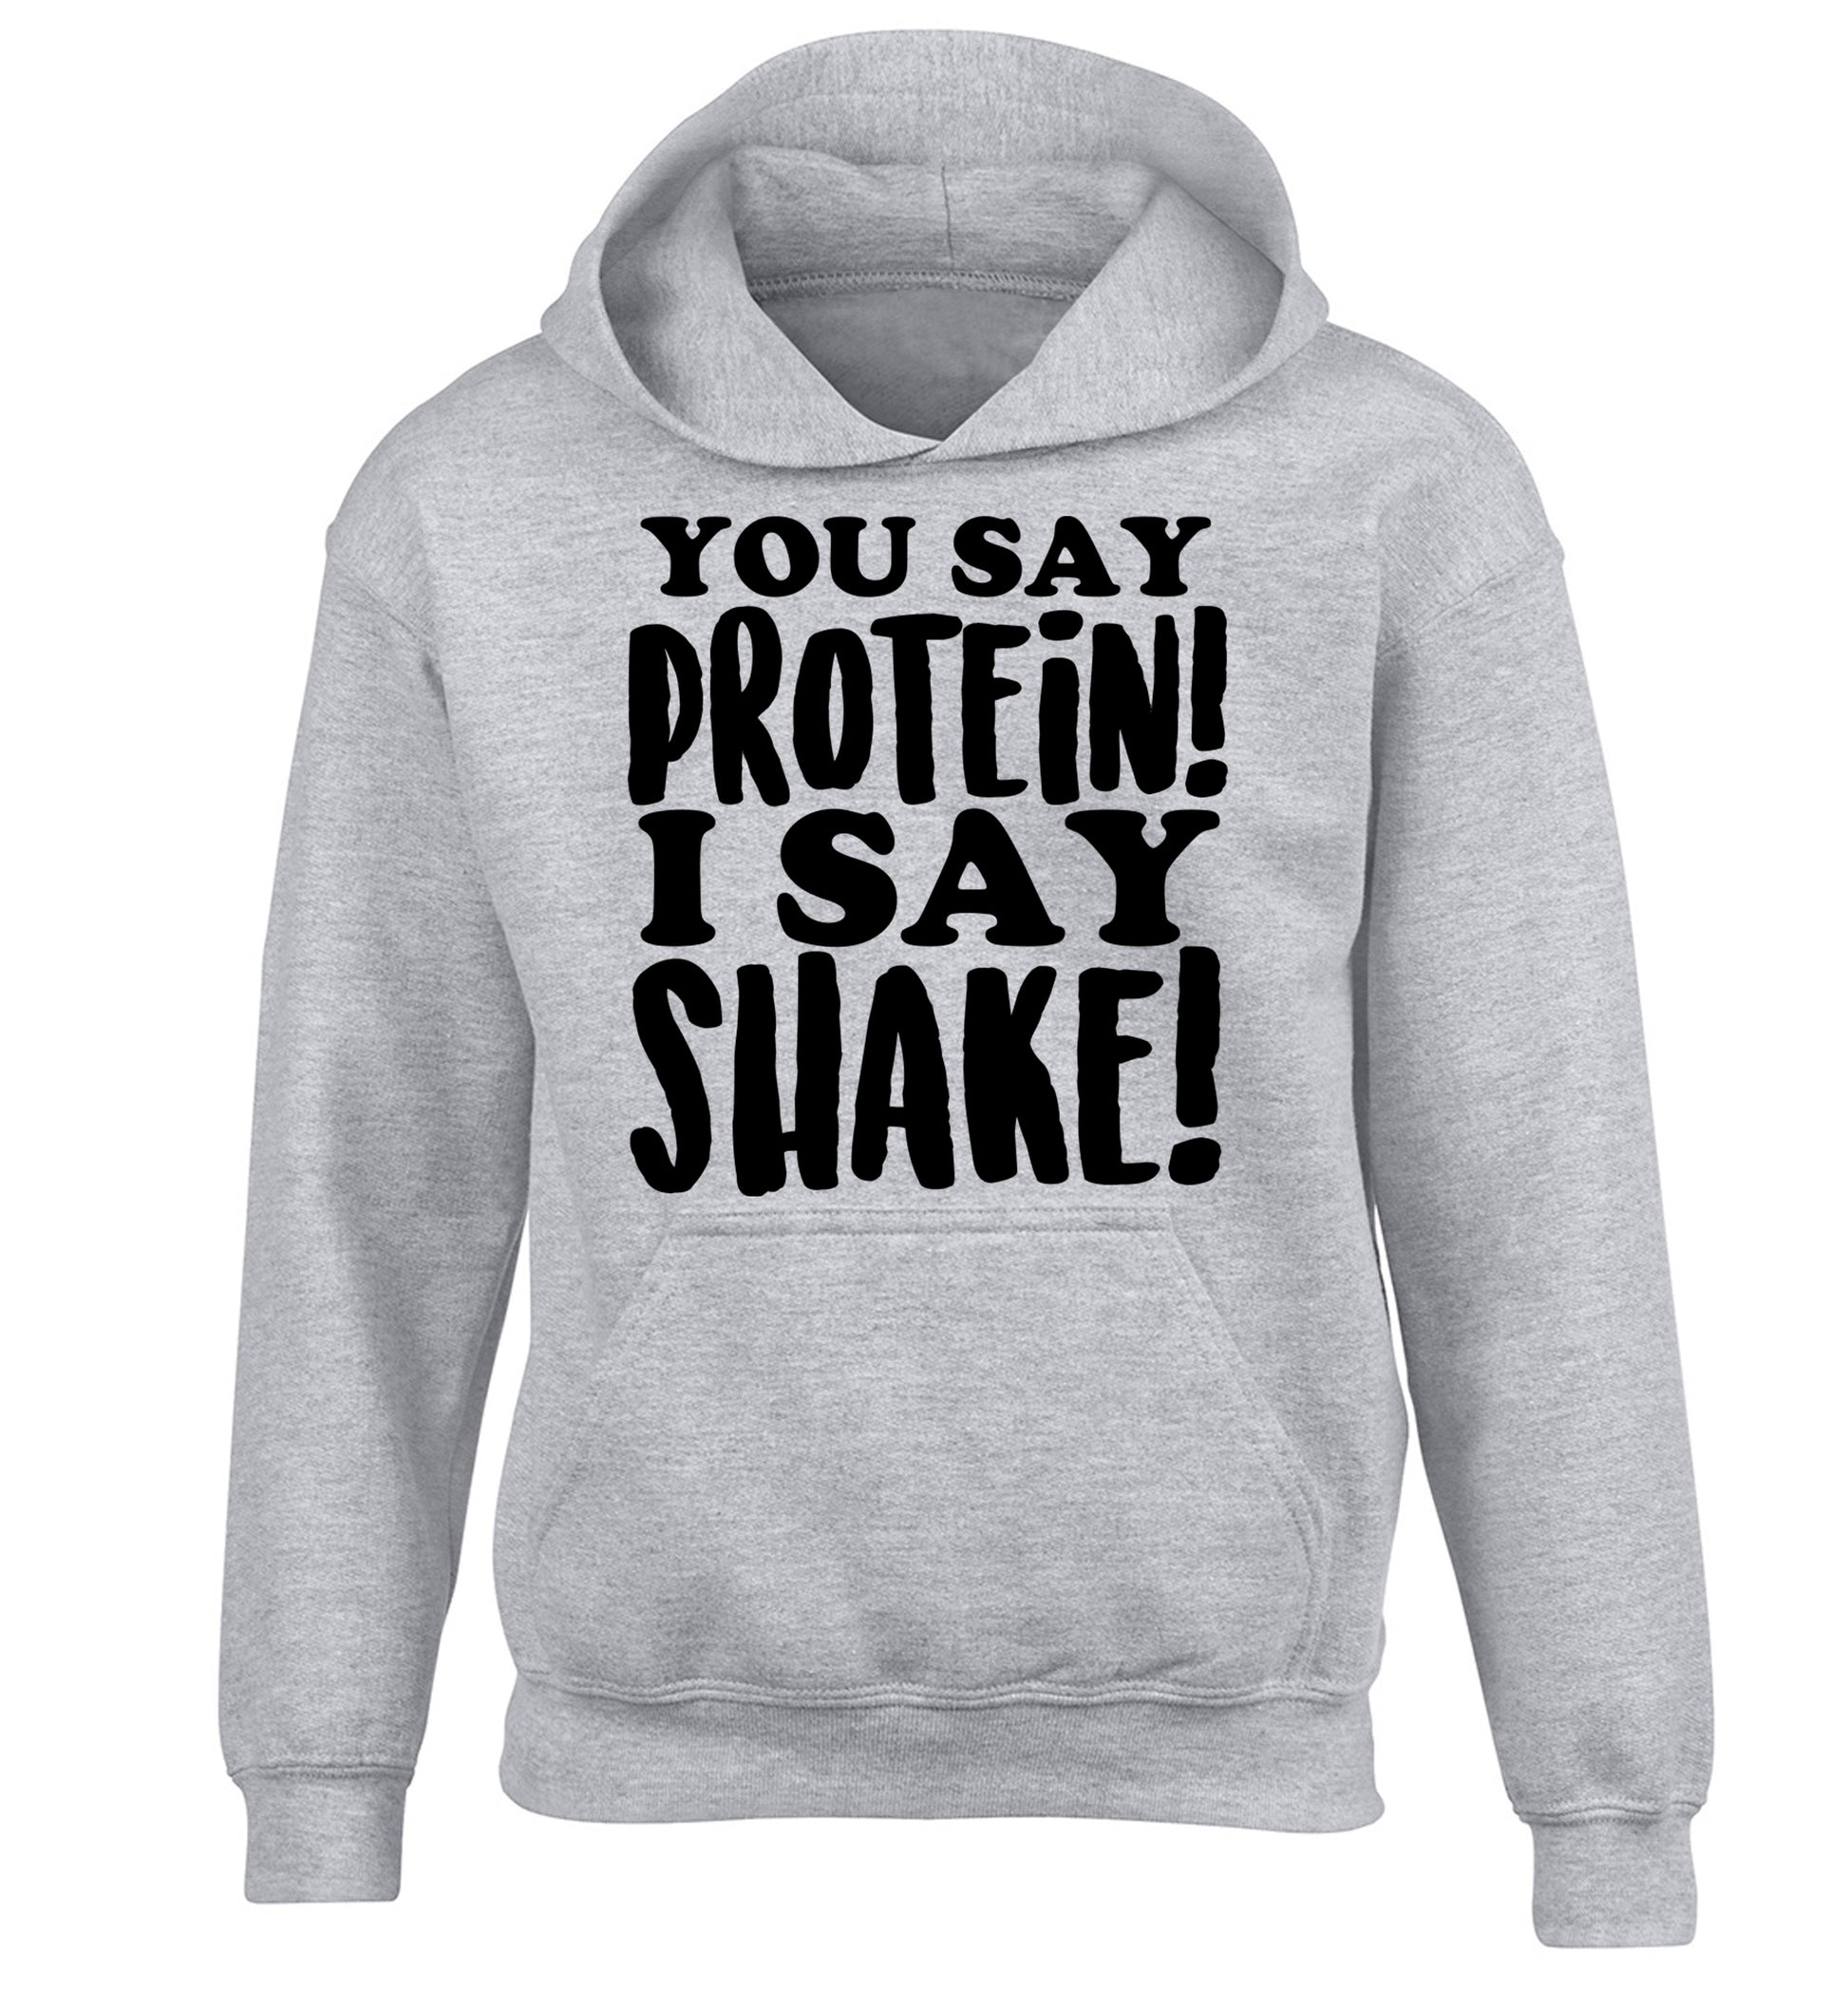 You say protein I say shake! children's grey hoodie 12-14 Years